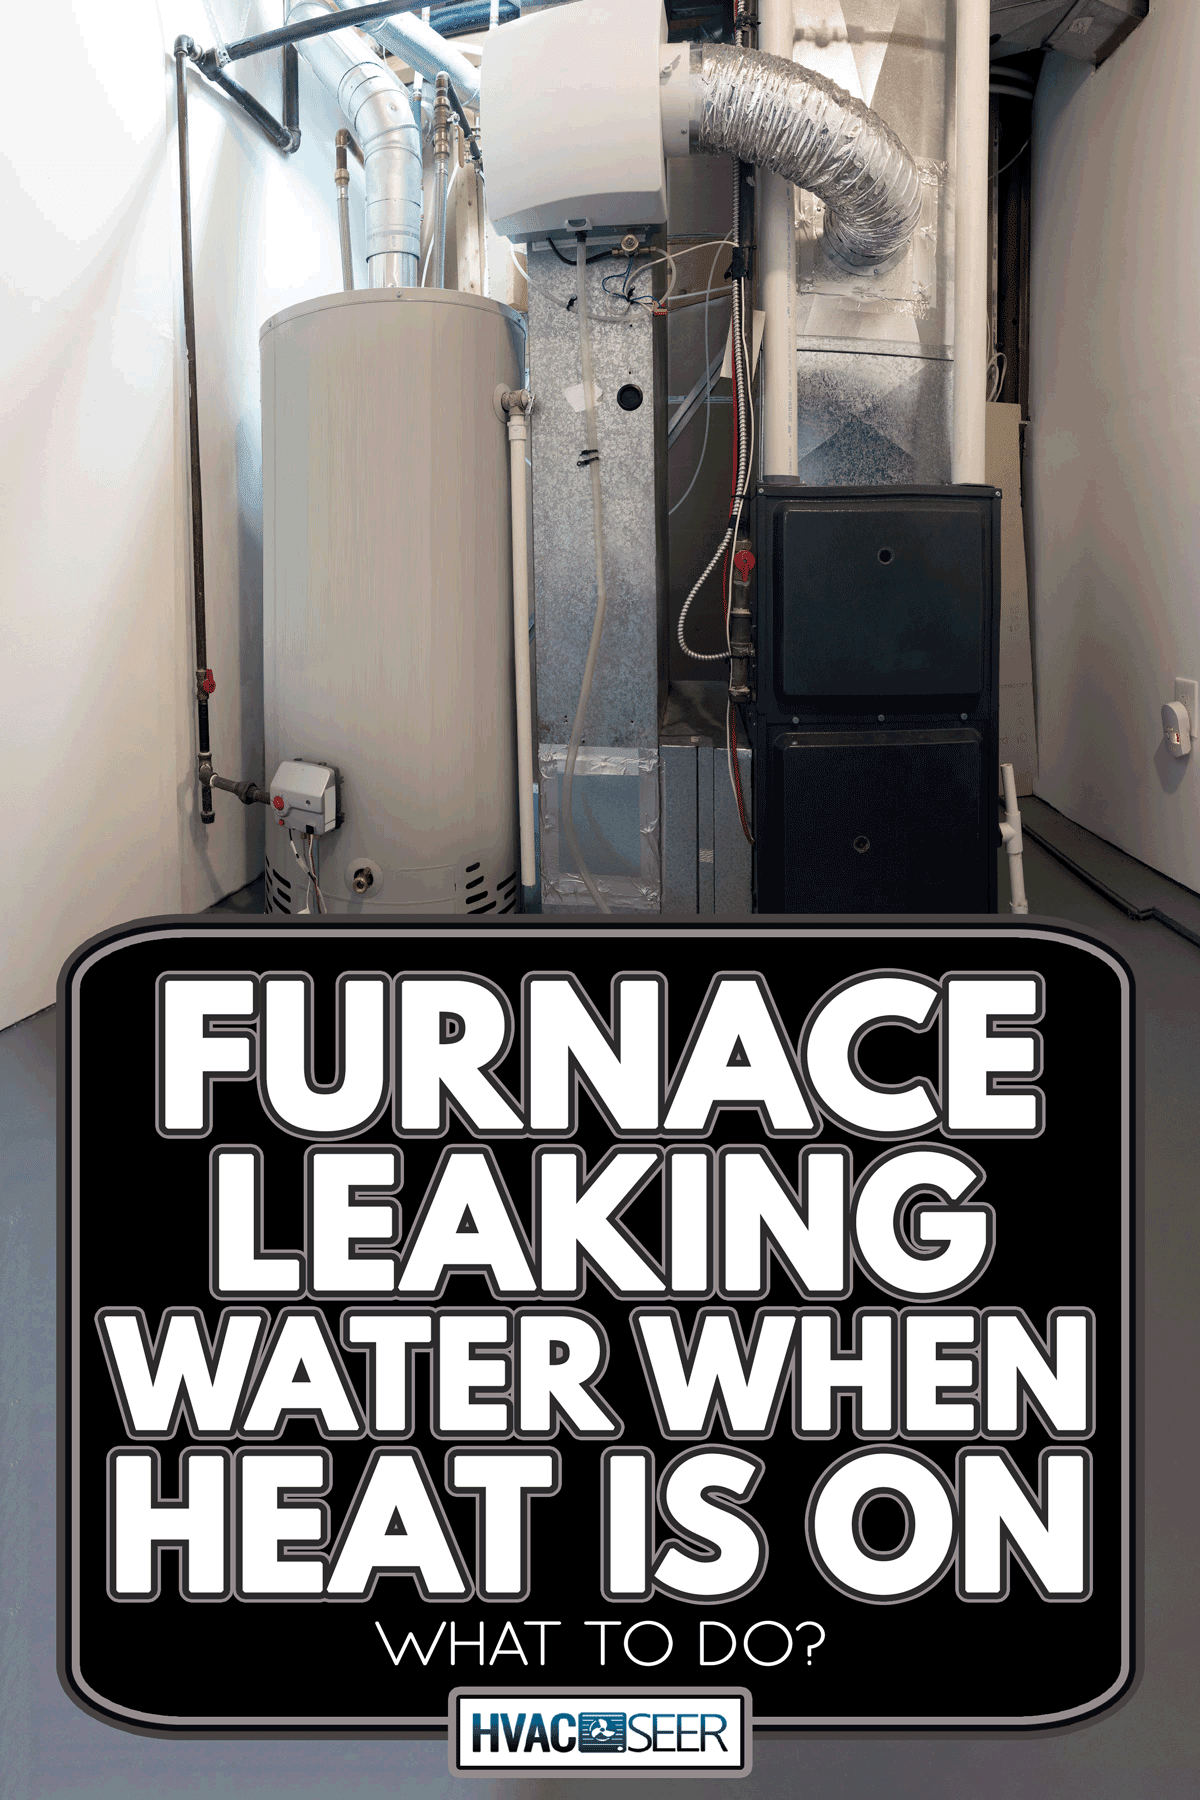 A home high efficiency furnace, Furnace Leaking Water When Heat Is On - What To Do?